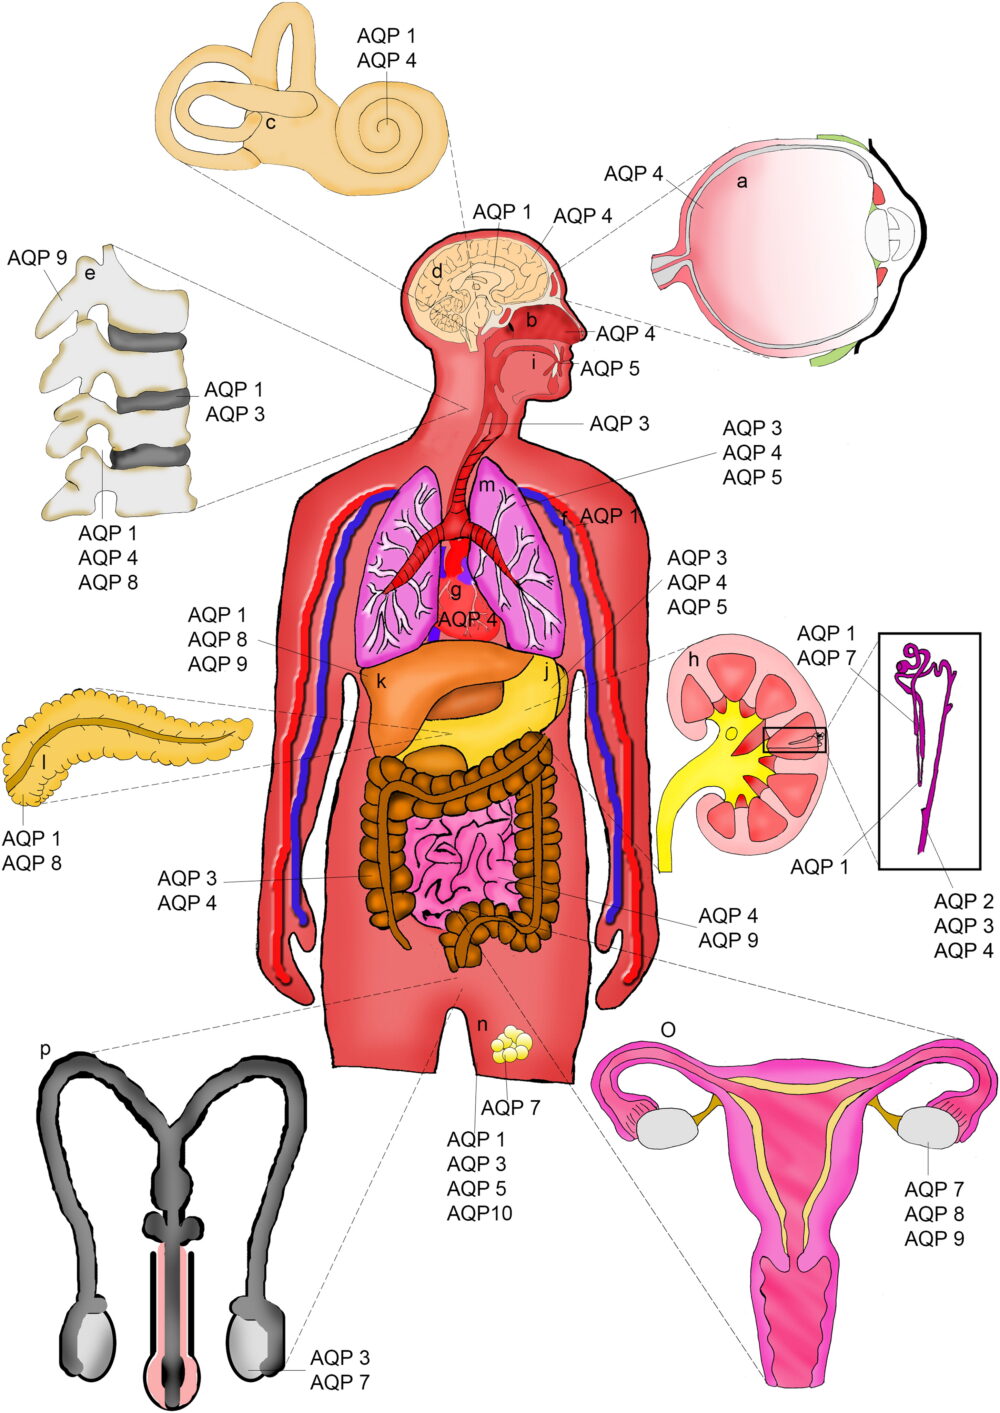 A diagram of the human body with each organ's corresponding aquaporins listed